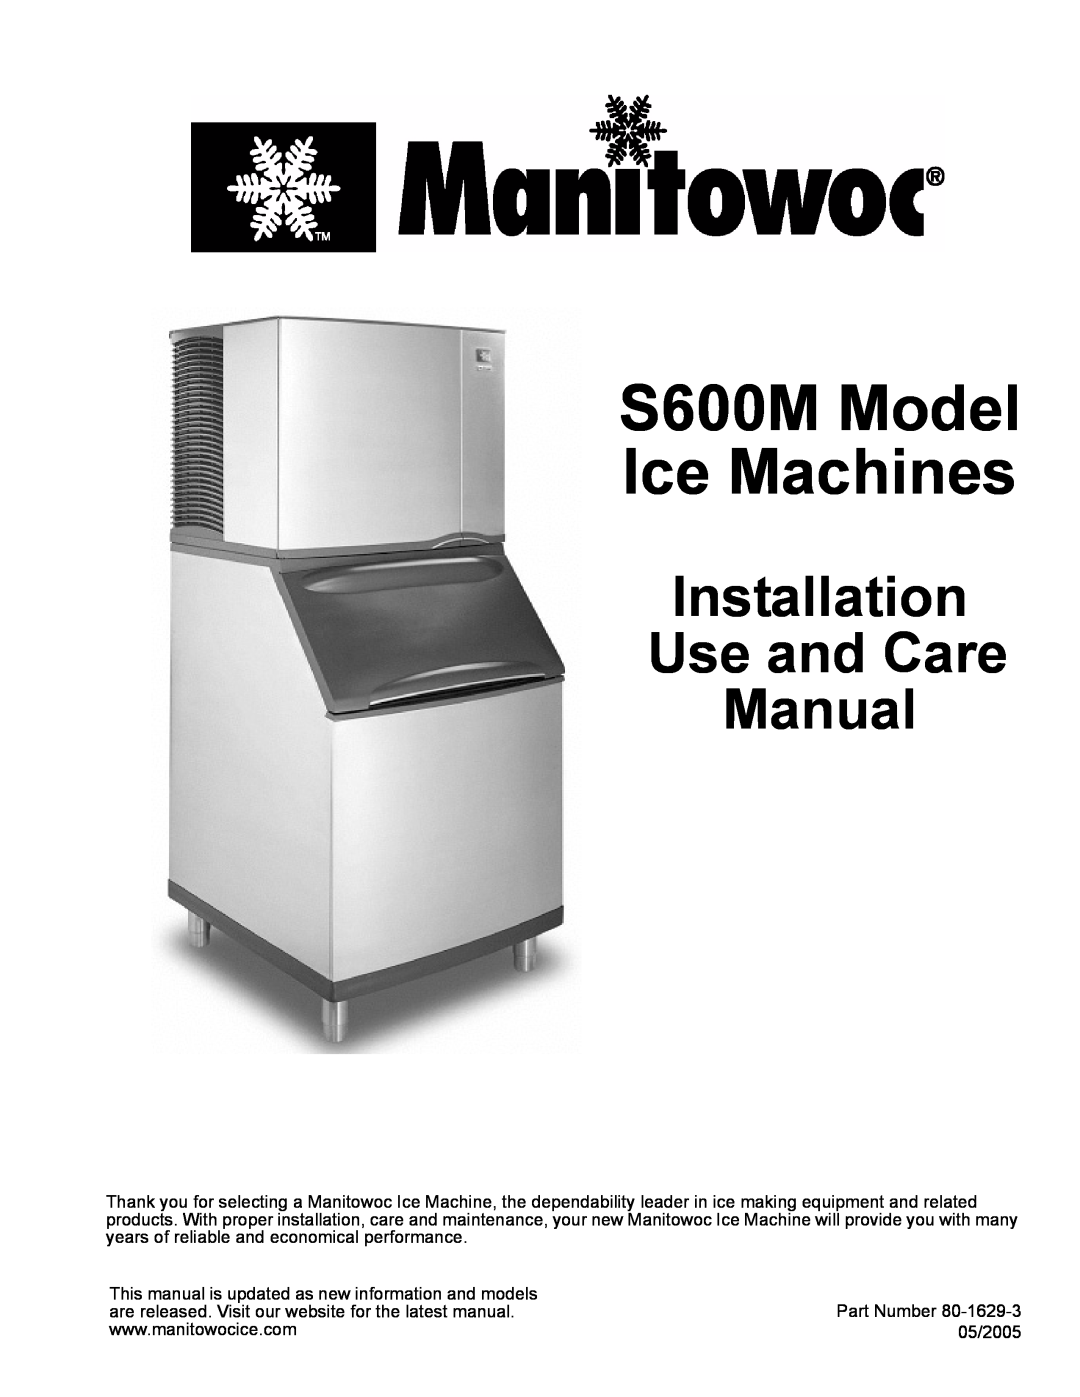 Manitowoc Ice manual S600M Model Ice Machines, Installation Use and Care Manual 